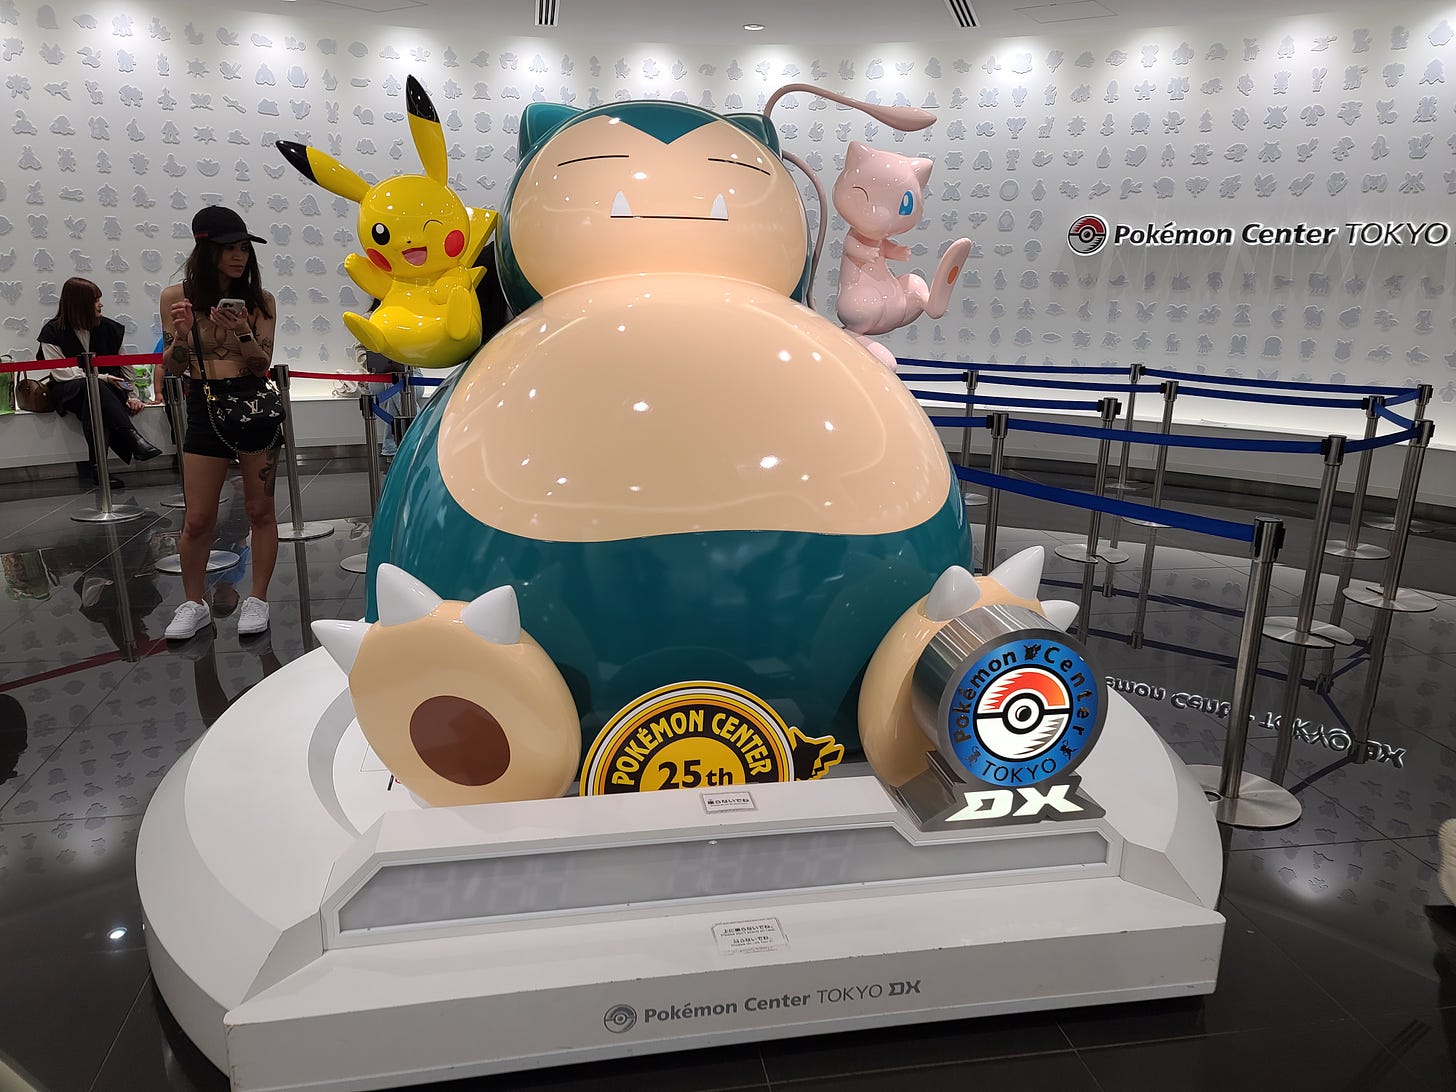 This gigantic Snorlax statue, featuring Pikachu and Mew, can be found at the Pokémon Center Tokyo DX store